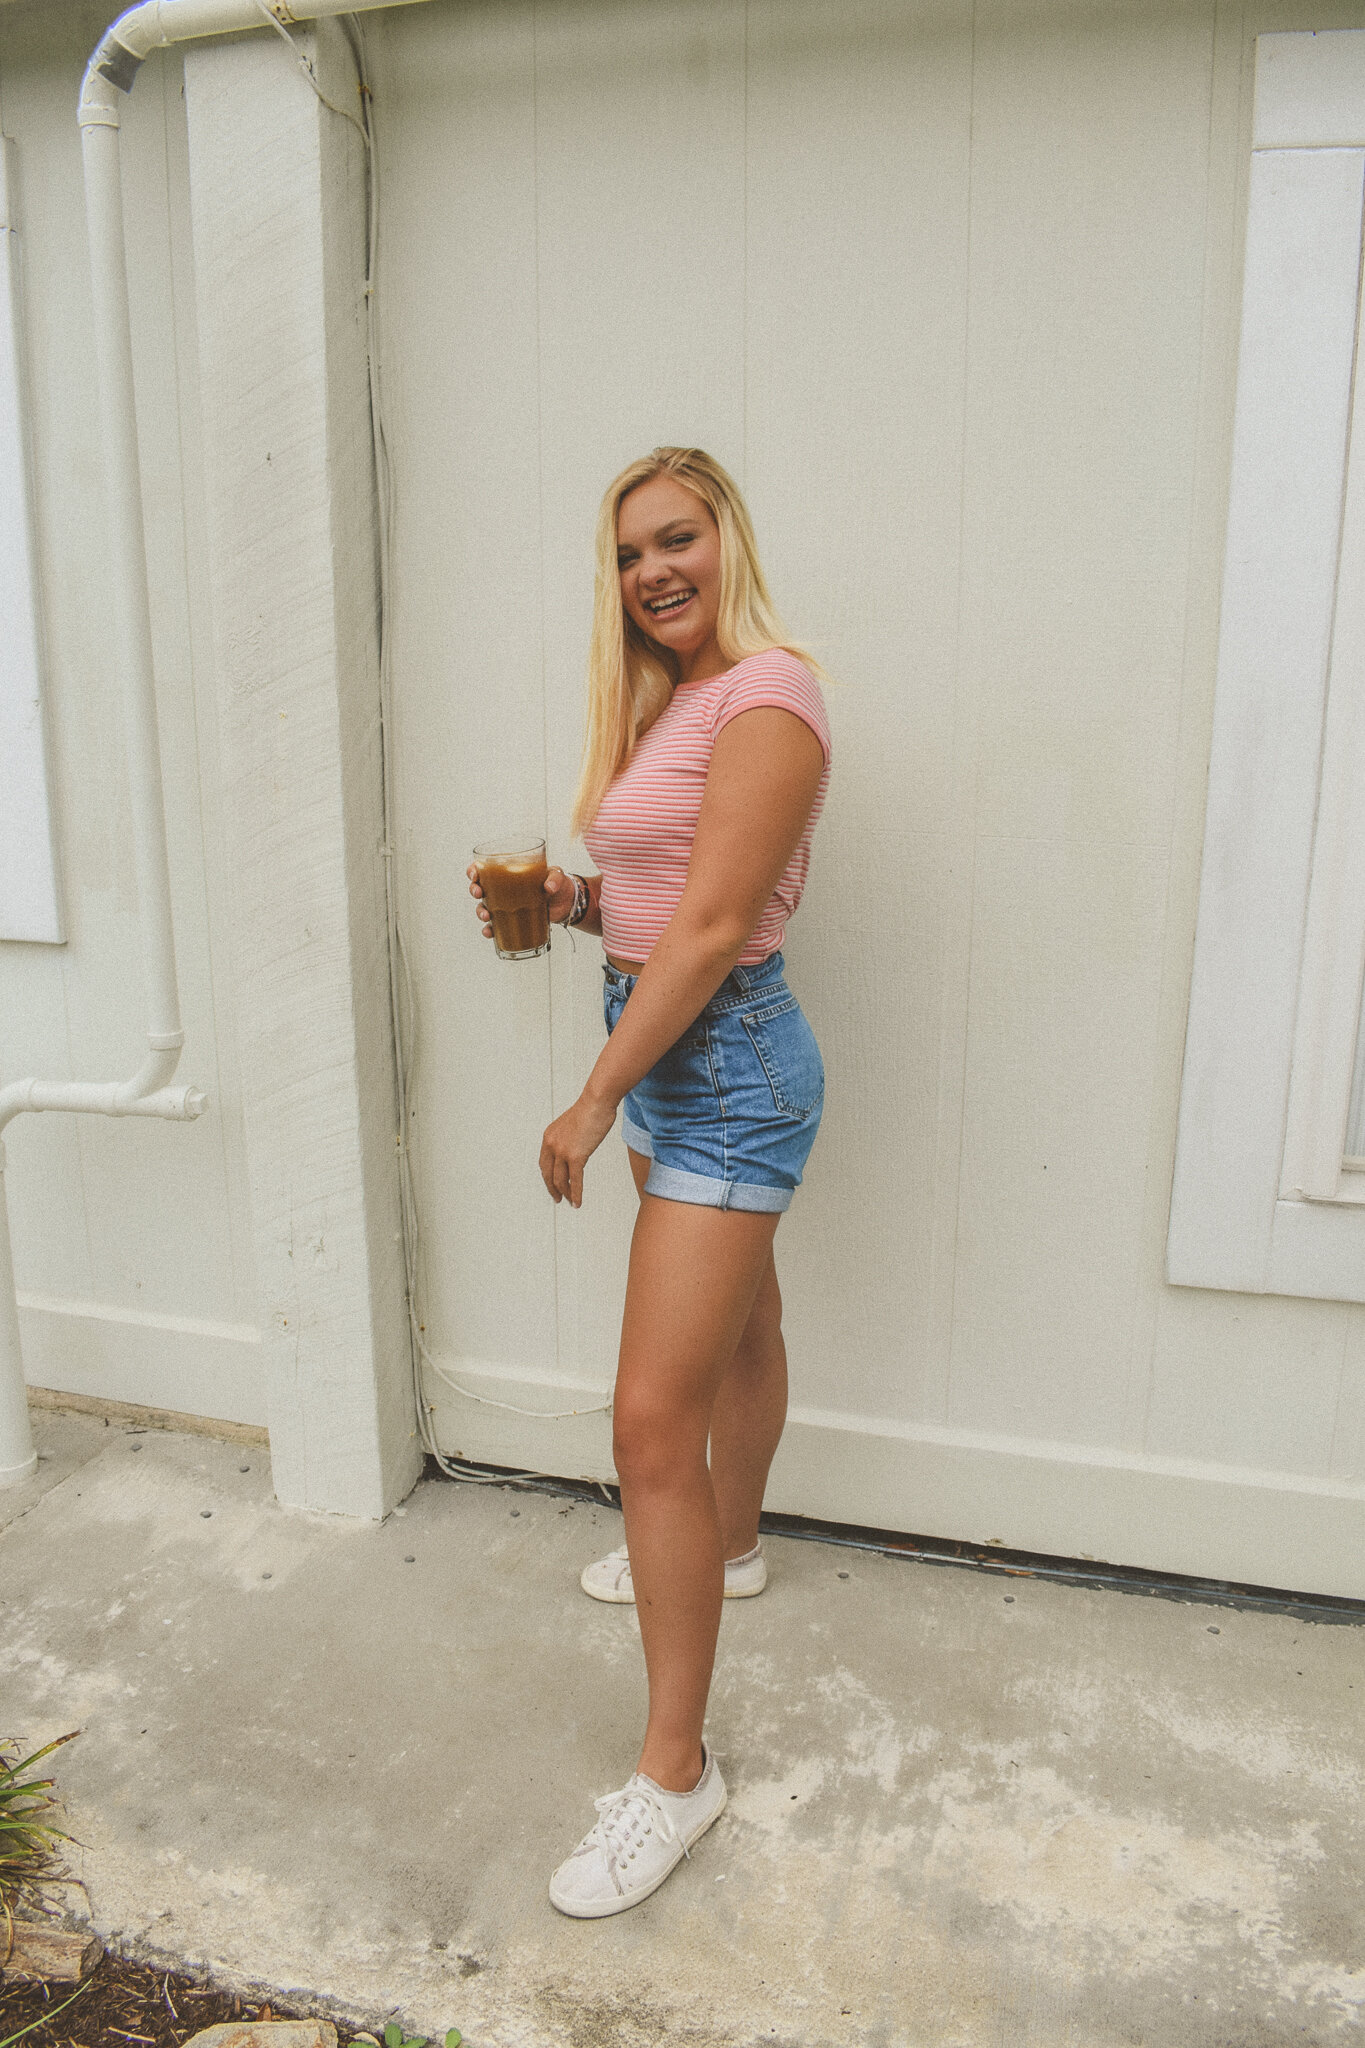 Outfit thrifted from Salvation Army: Shorts-Levi